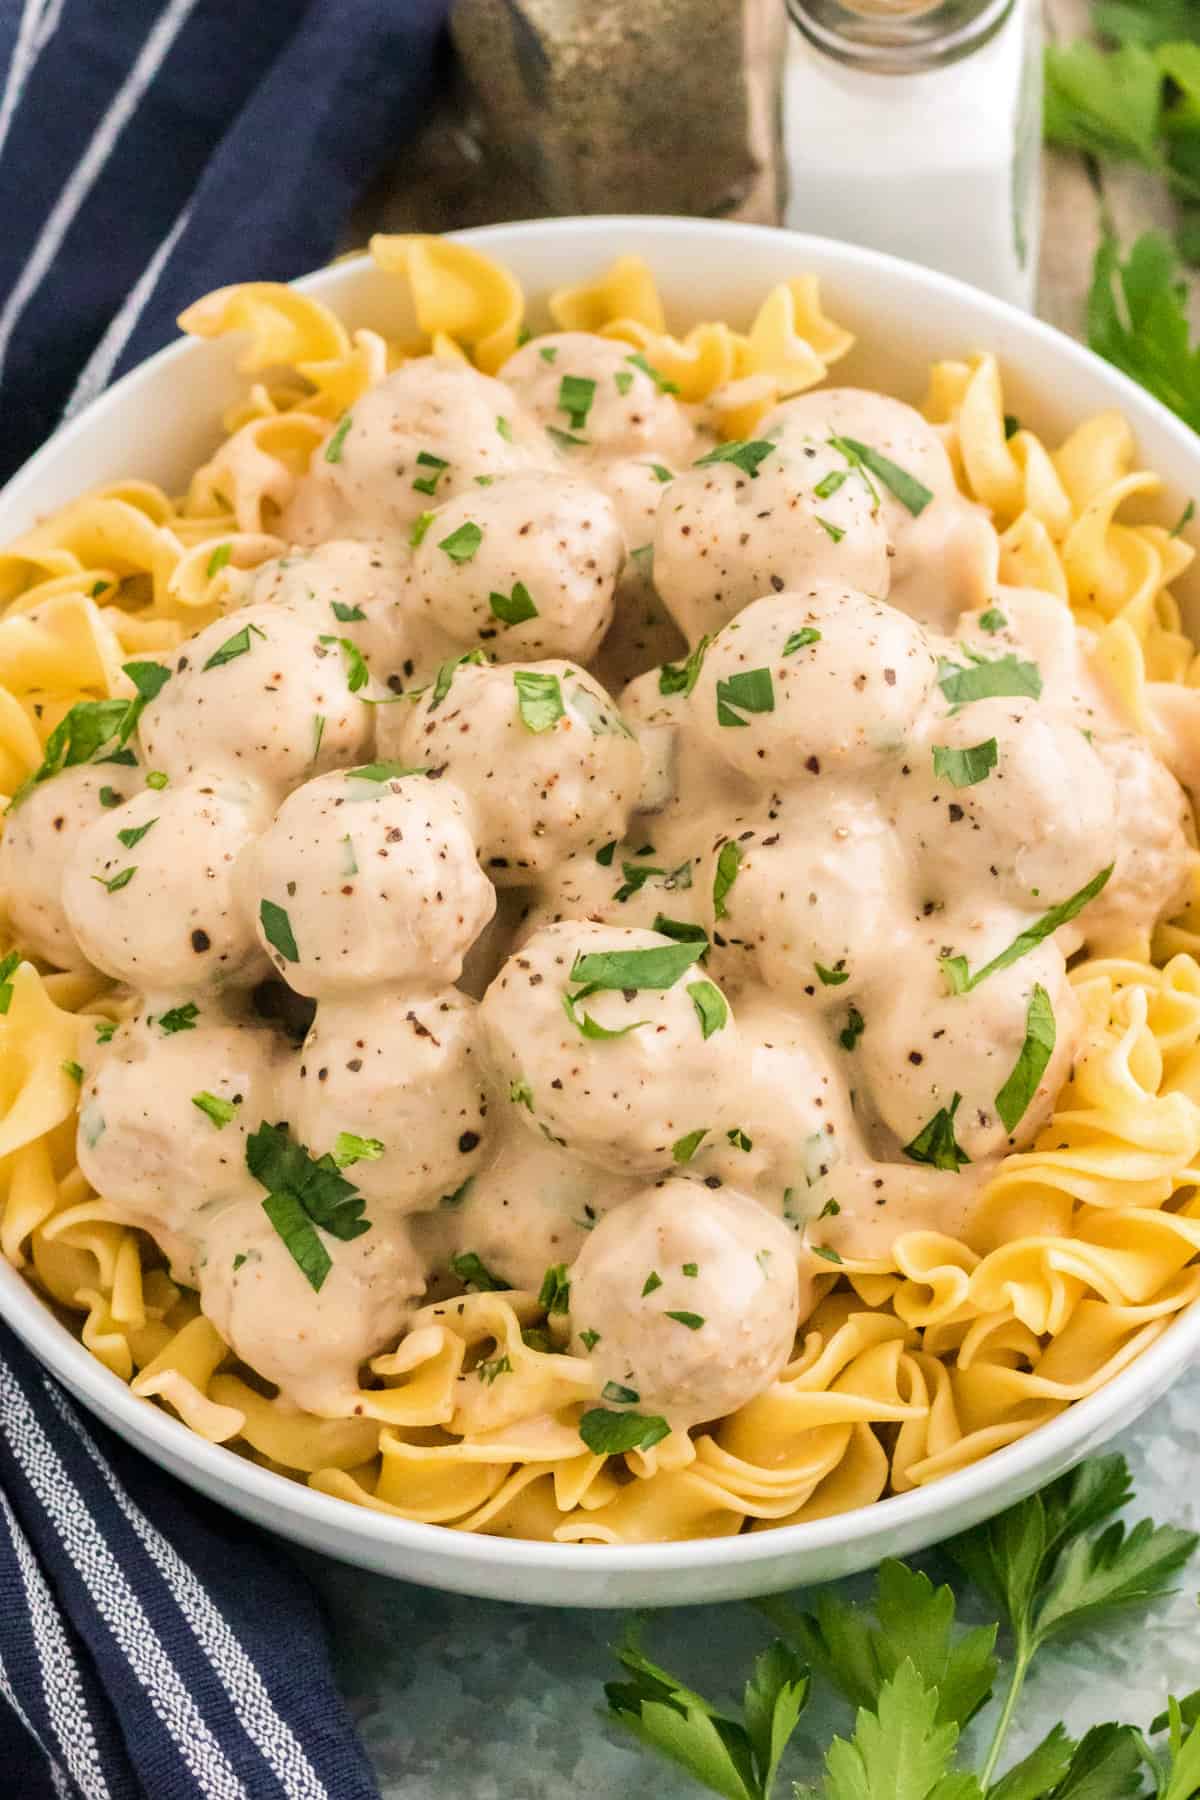 Swedish meatballs and egg noodles in large bowl with salt, pepper, and parsley next to it.